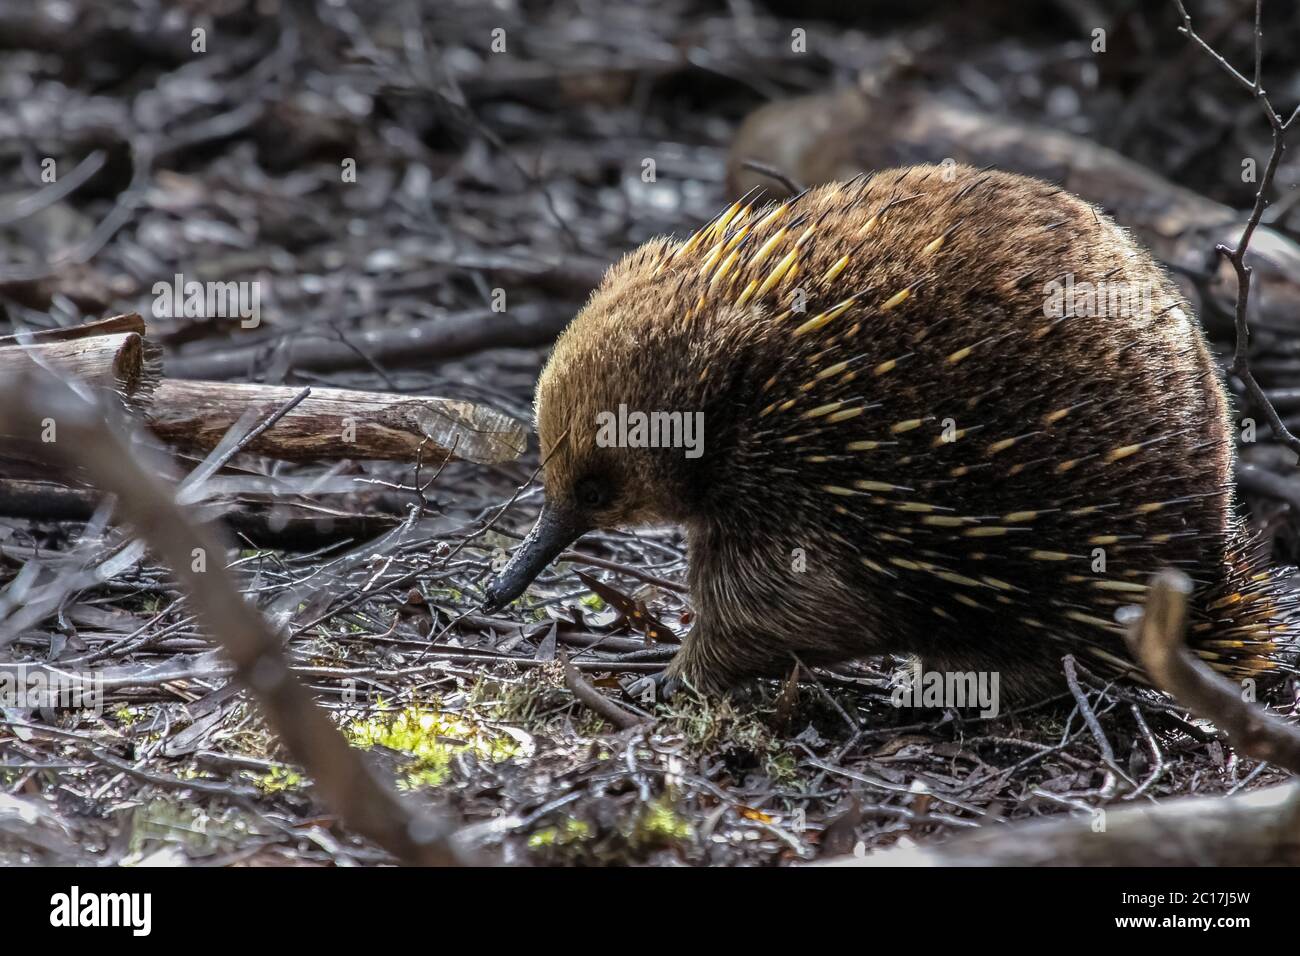 Echidna foraging in the forest, Tasmania Stock Photo